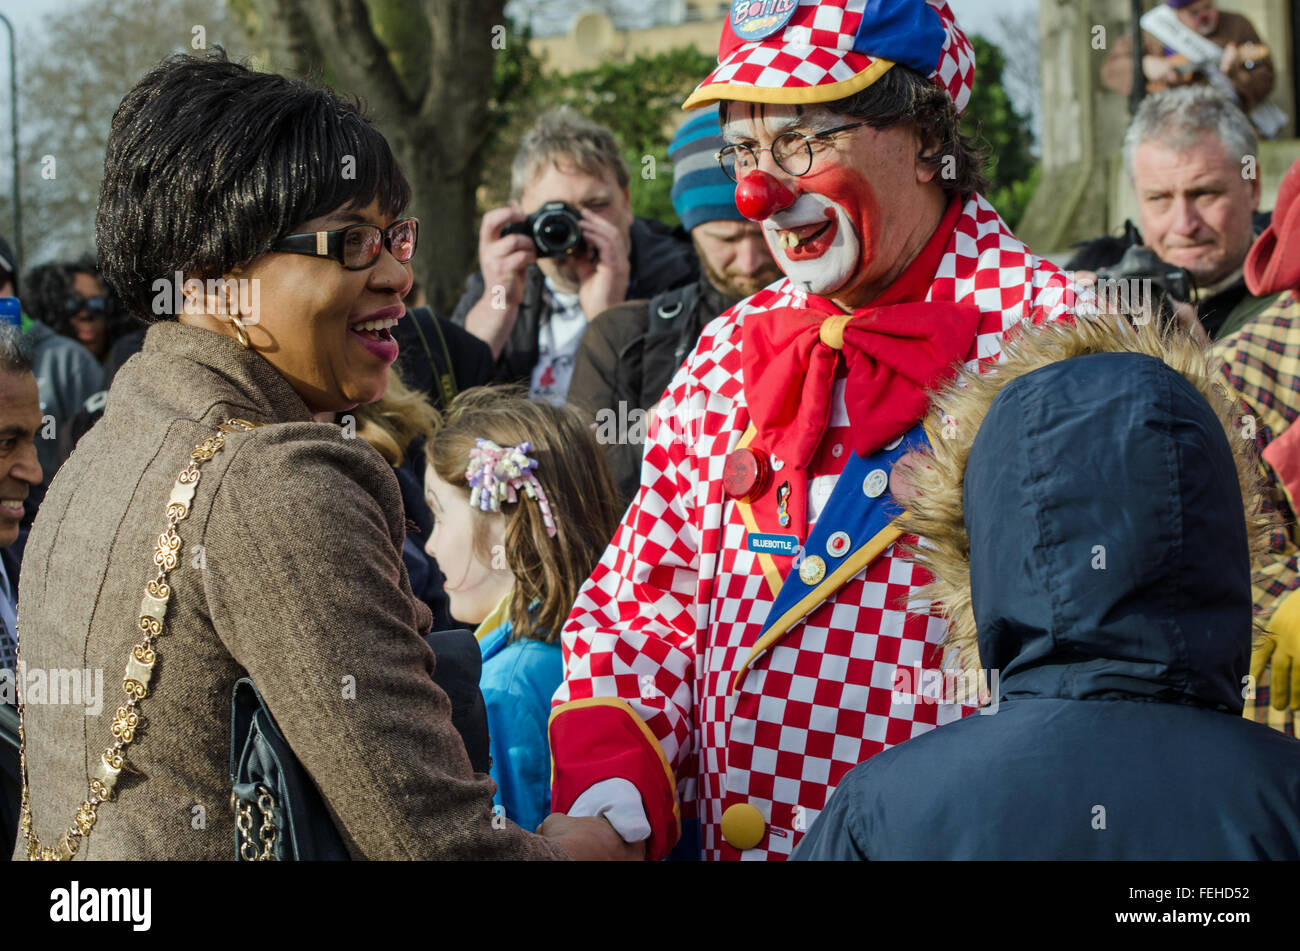 Hackney, London, UK. 7th February, 2016. Councillor Sade Etti, Deputy Speaker of Hackney Council, is welcomed to the Annual Clown Service by Bluebottle, also known as Tony Eldridge of Clowns International.  All Saints Church, Haggerston, where clowns are holding a memorial to Joseph Grimaldi, known as the King of Clowns. Credit:  Amanda Lewis/Alamy Live News Stock Photo